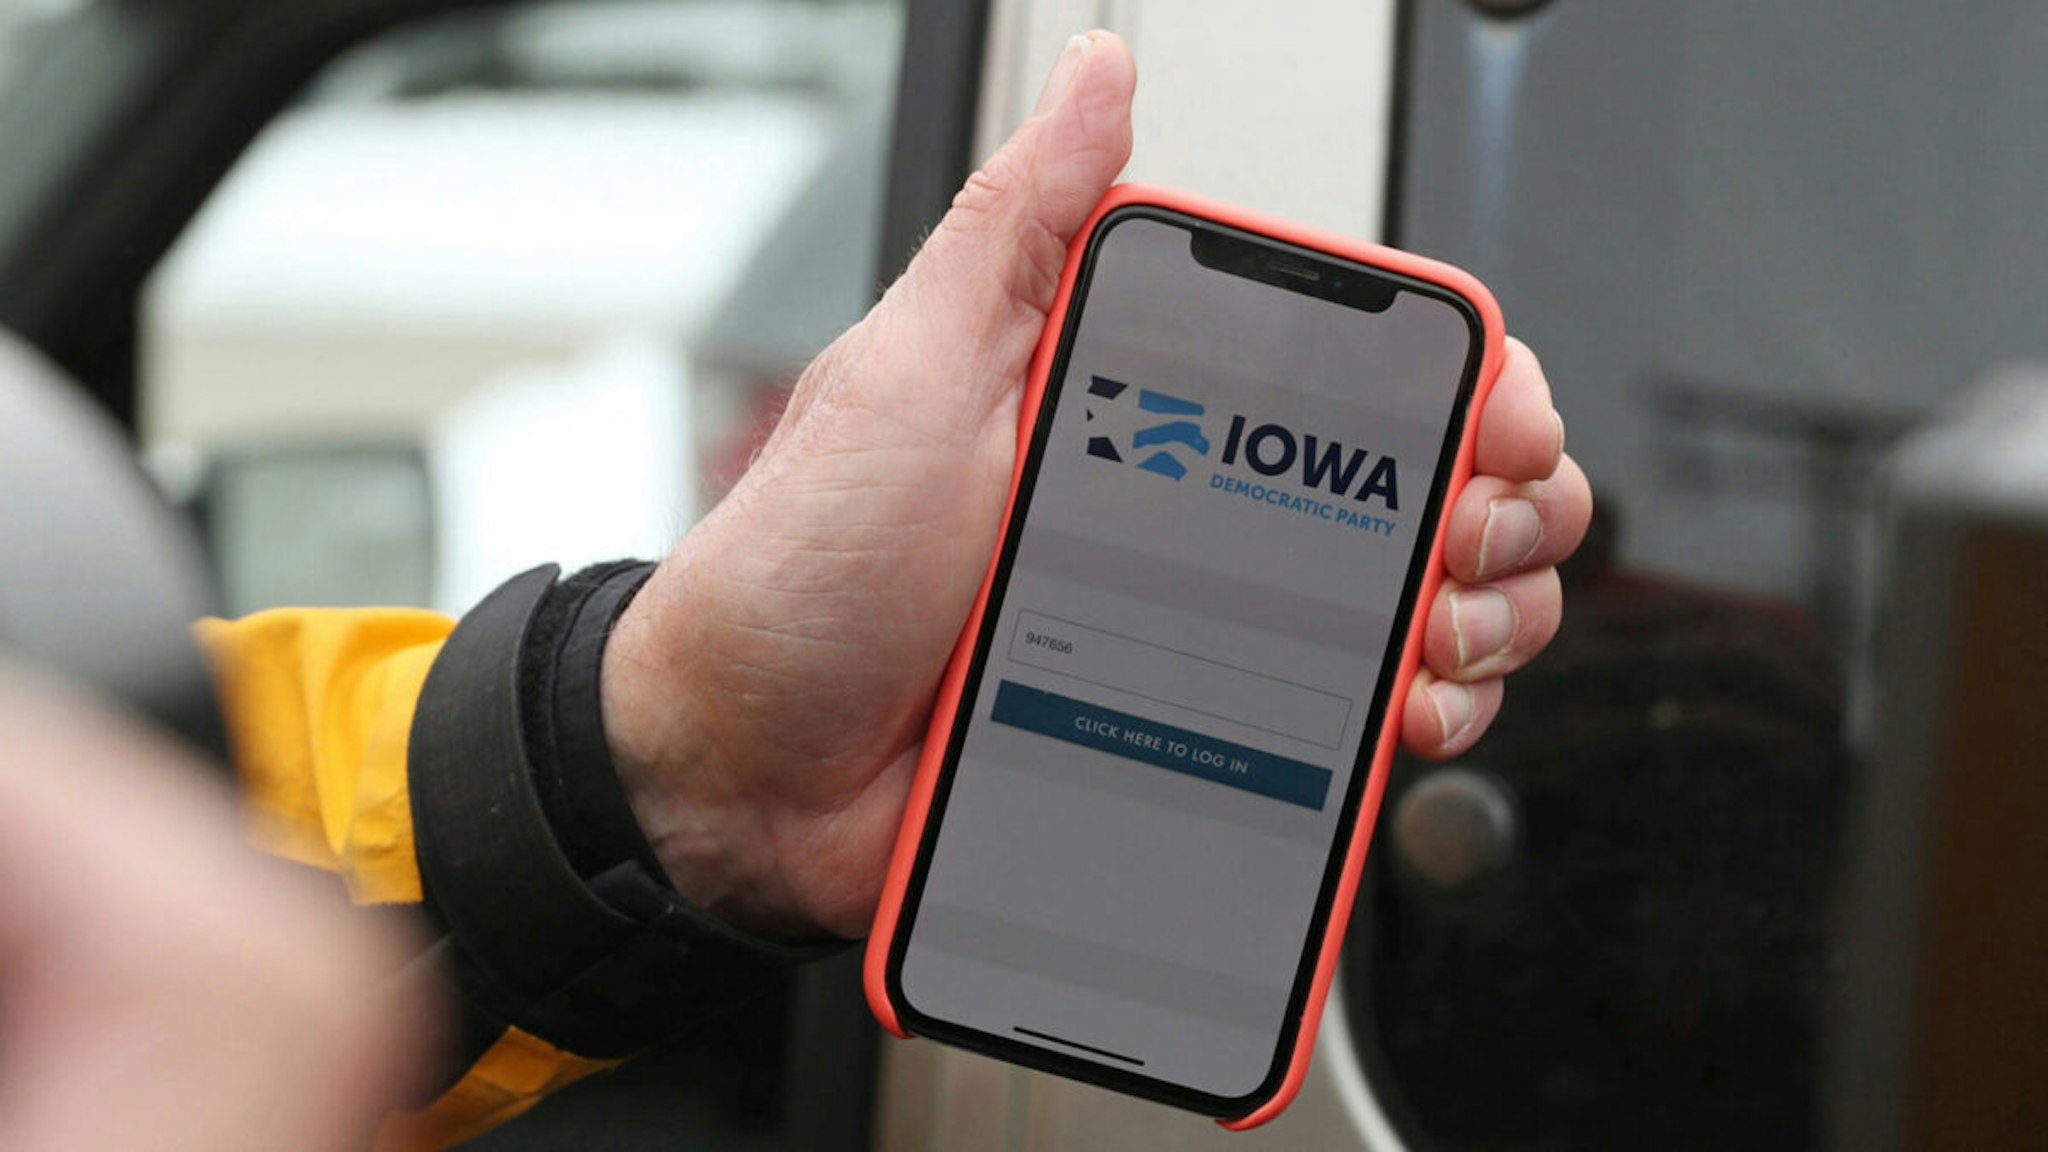 Precinct Chair Carl Voss shows the phone app he used for the Iowa Caucus to news media at the Iowa Democratic Party headquarters on February 4, 2020, in Des Moines, Iowa.